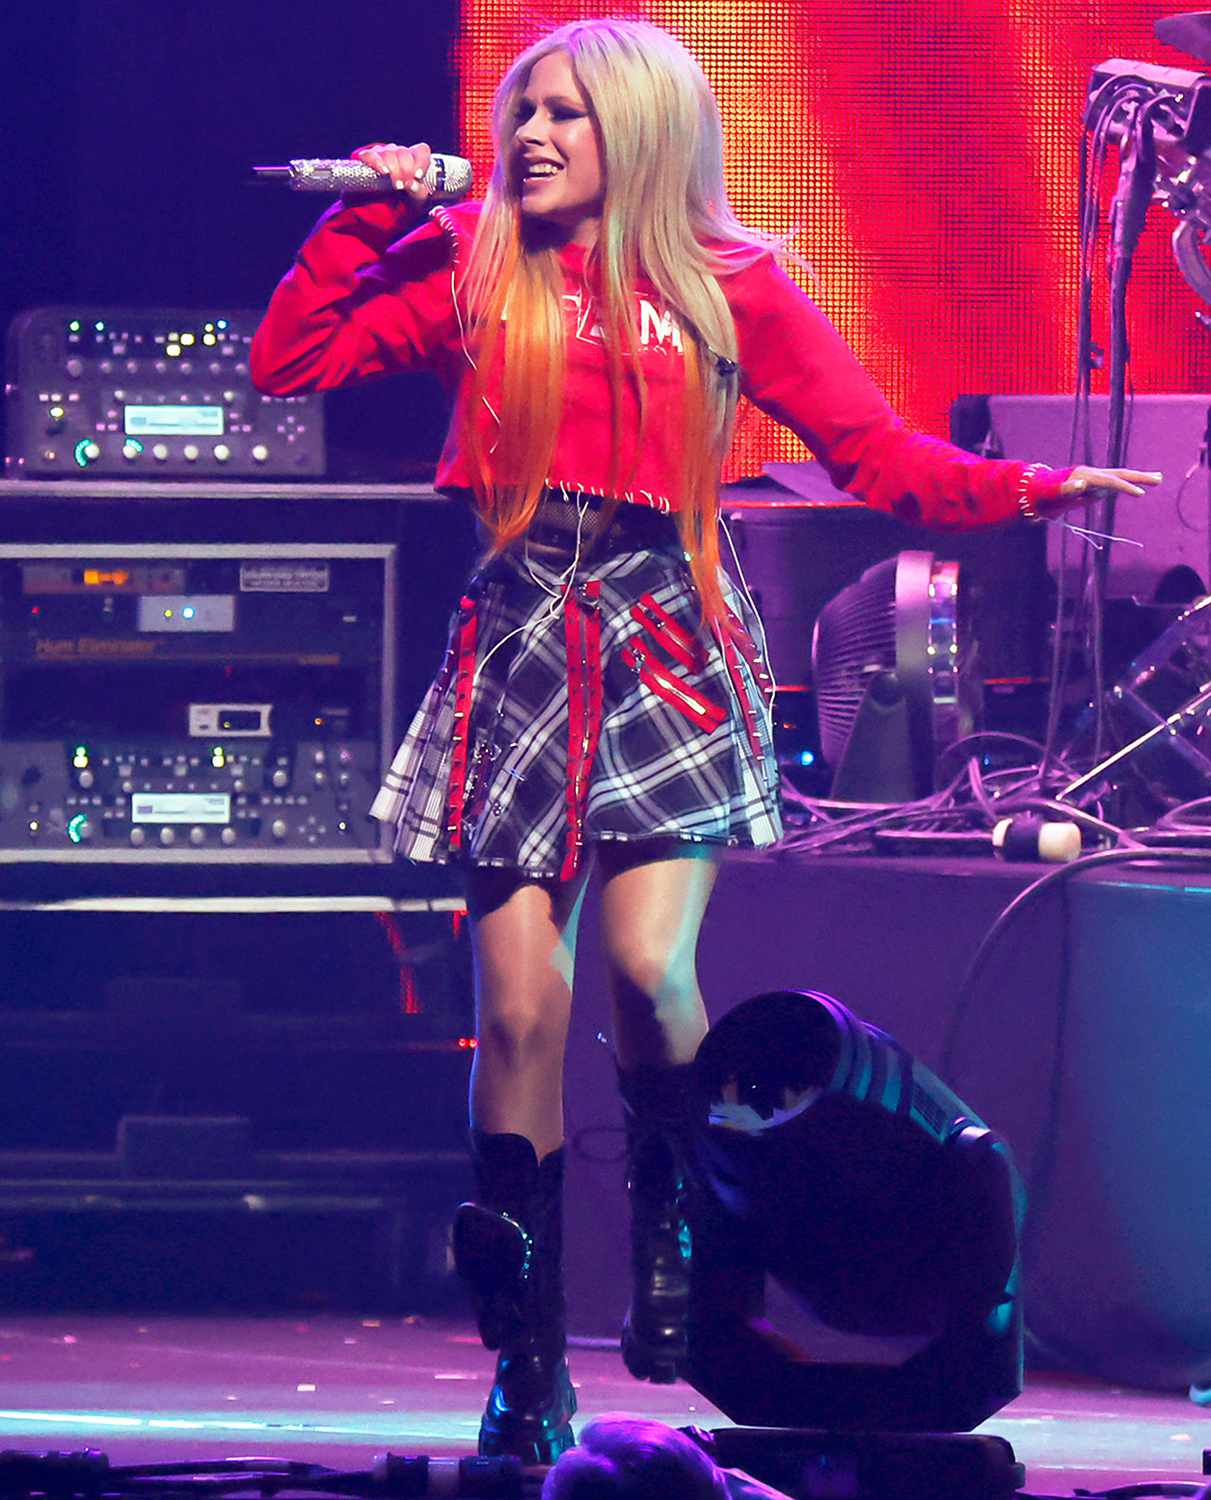 Avril Lavigne performs onstage for iHeartRadio ALTer EGO presented by Capital One at The Forum on January 15, 2022 in Inglewood, California.